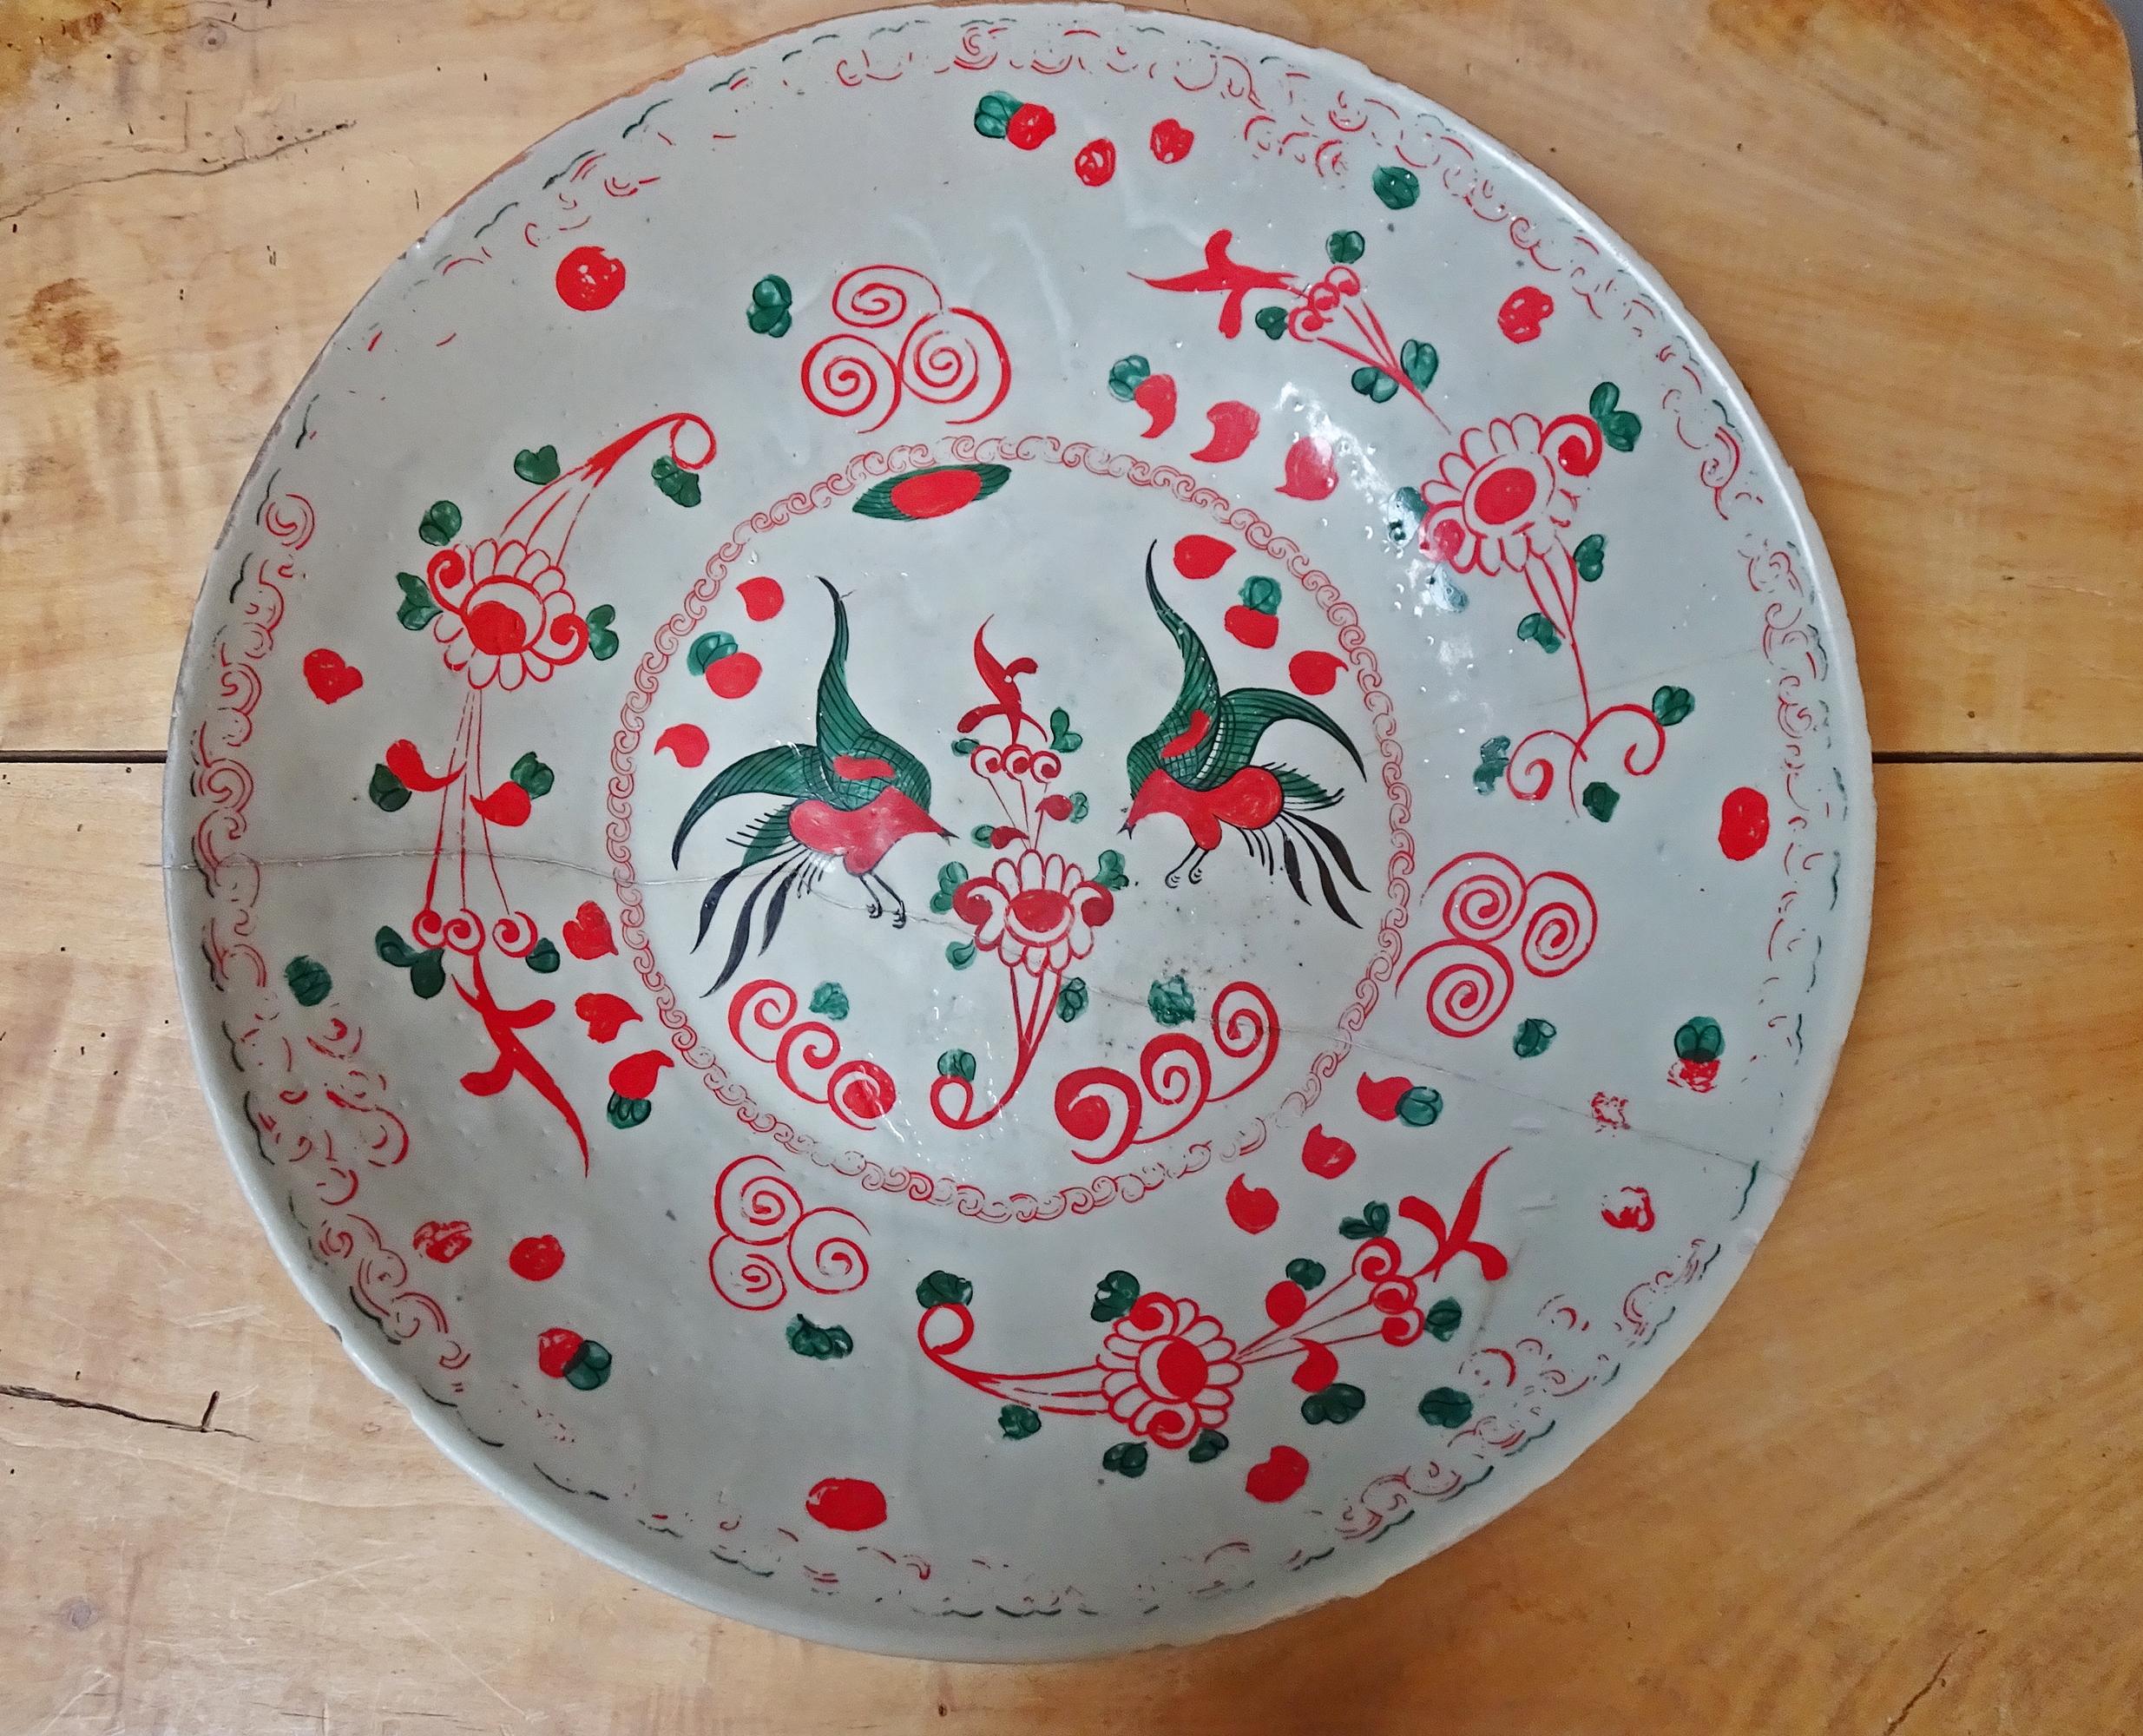 Antique 18th century ceramic bowl. Tin-glazed ceramics with slip painting in red, green and black. A special decor, adorned with floral details and two mythical birds. The decoration is reminiscent of Islamic ceramics.

In good condition. A well